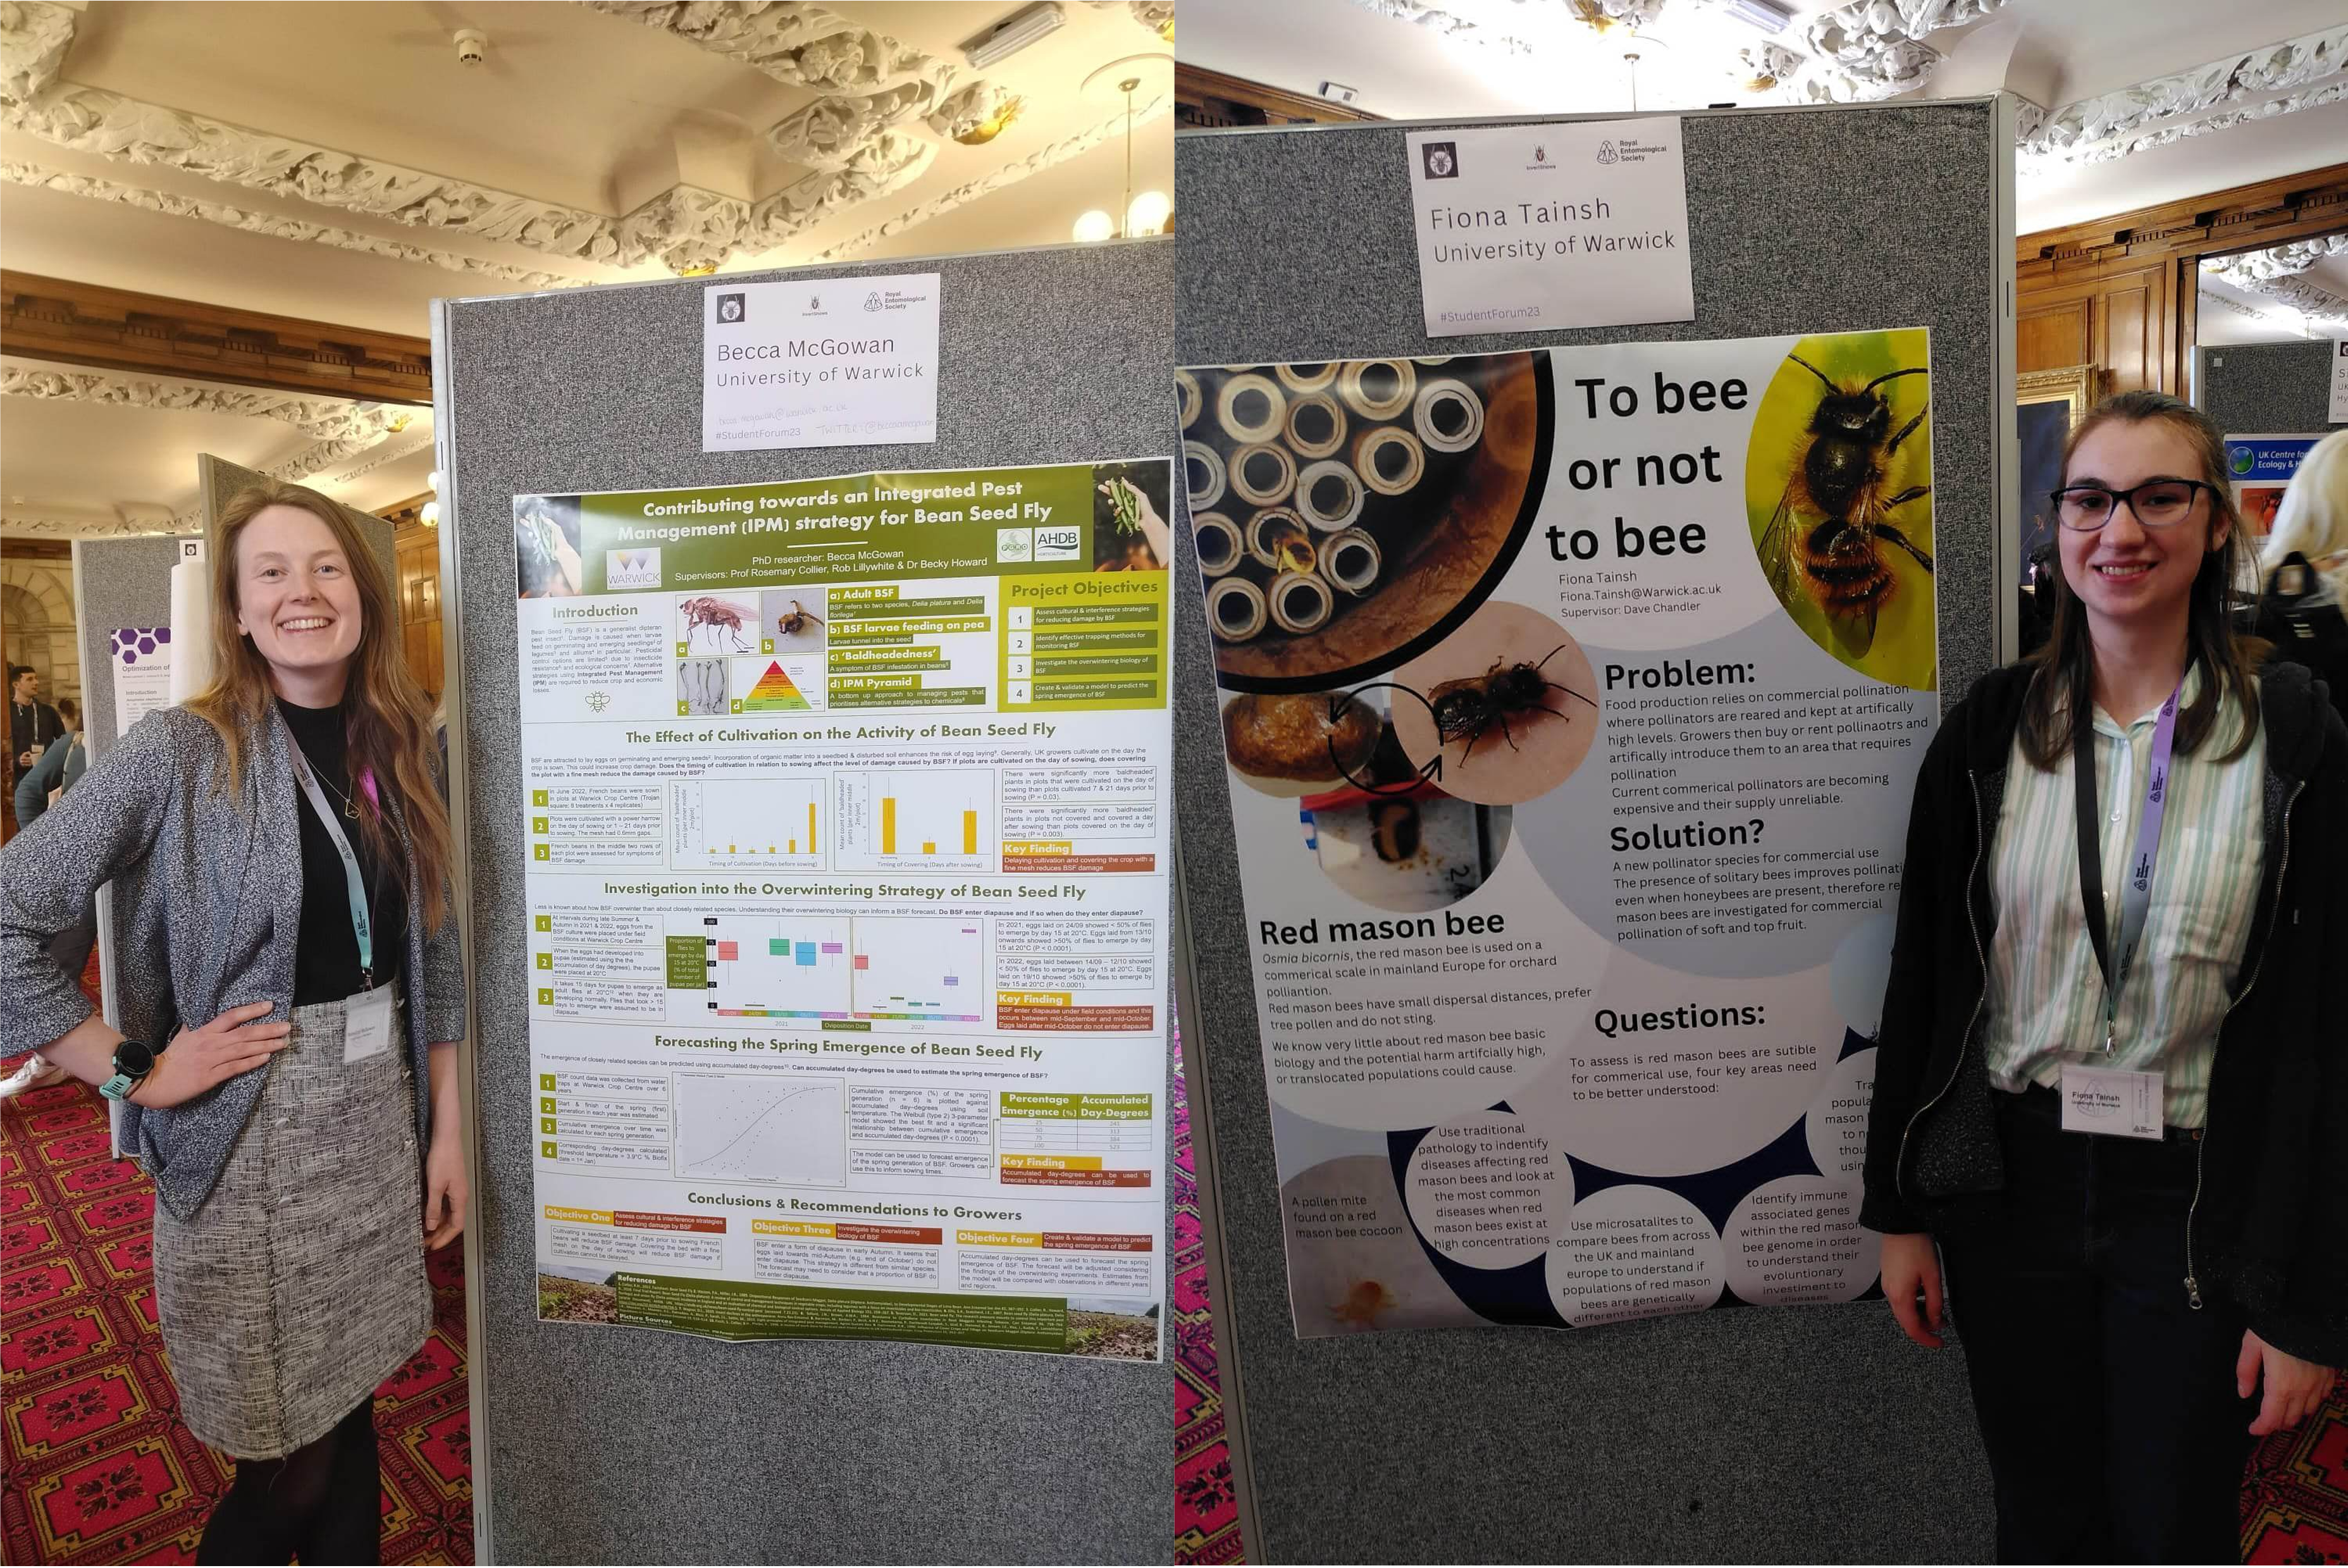 Becca McGowan and Fiona Tainsh presenting posters on their PhD research